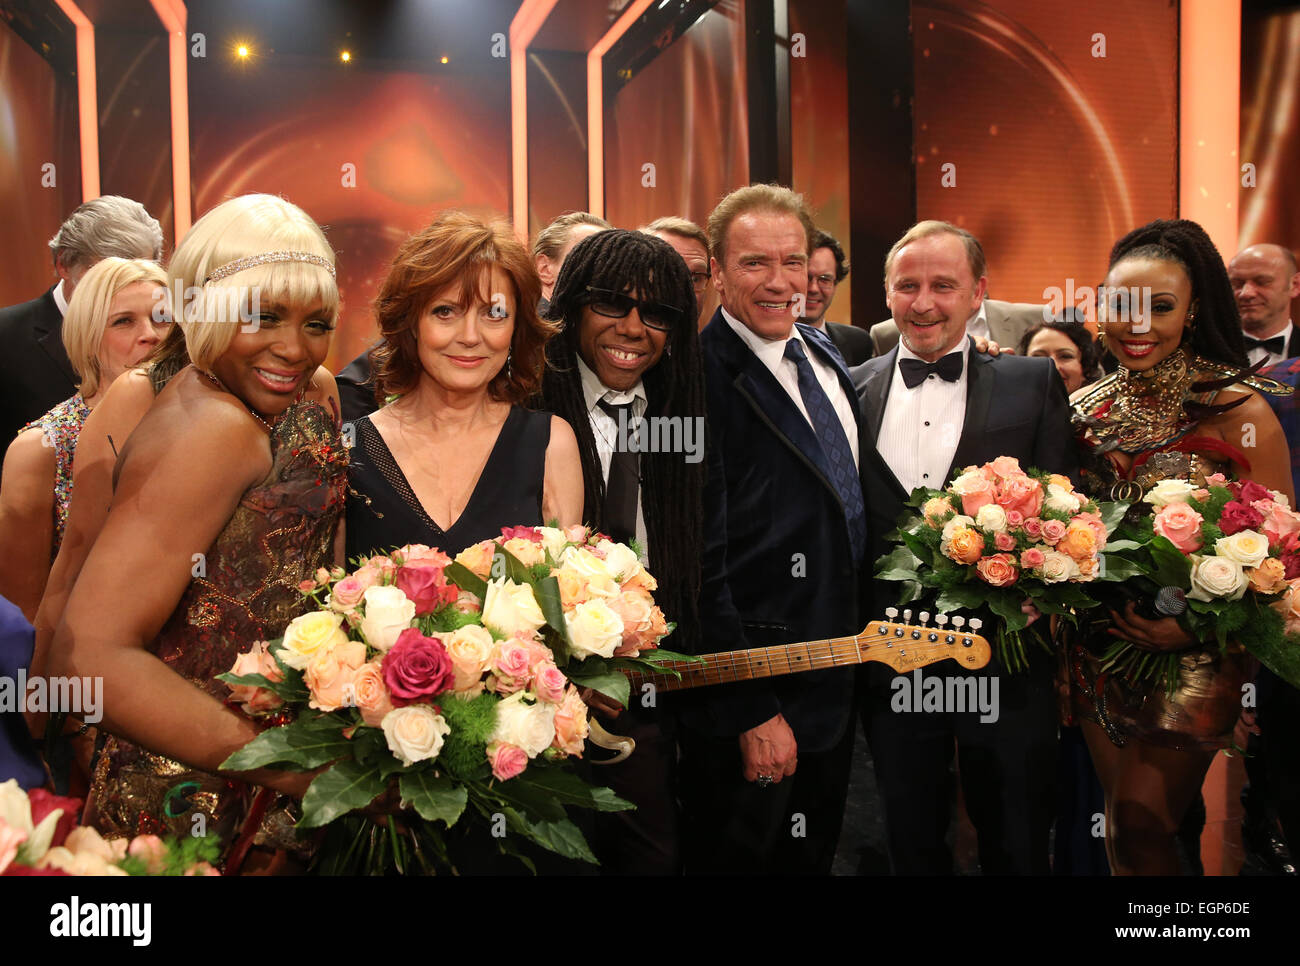 Hamburg, Germany. 27th Feb, 2015. US actress Susan Sarandon (2nd L), US music legend Nile Rodgers, Arnold Schwarzenegger and Alexander Held stand on stage during the 50th Golden Camera Award (Goldene Kamera) ceremony in Hamburg, Germany, 27 February 2015. Photo: Christian Charisius/dpa/Alamy Live News Stock Photo